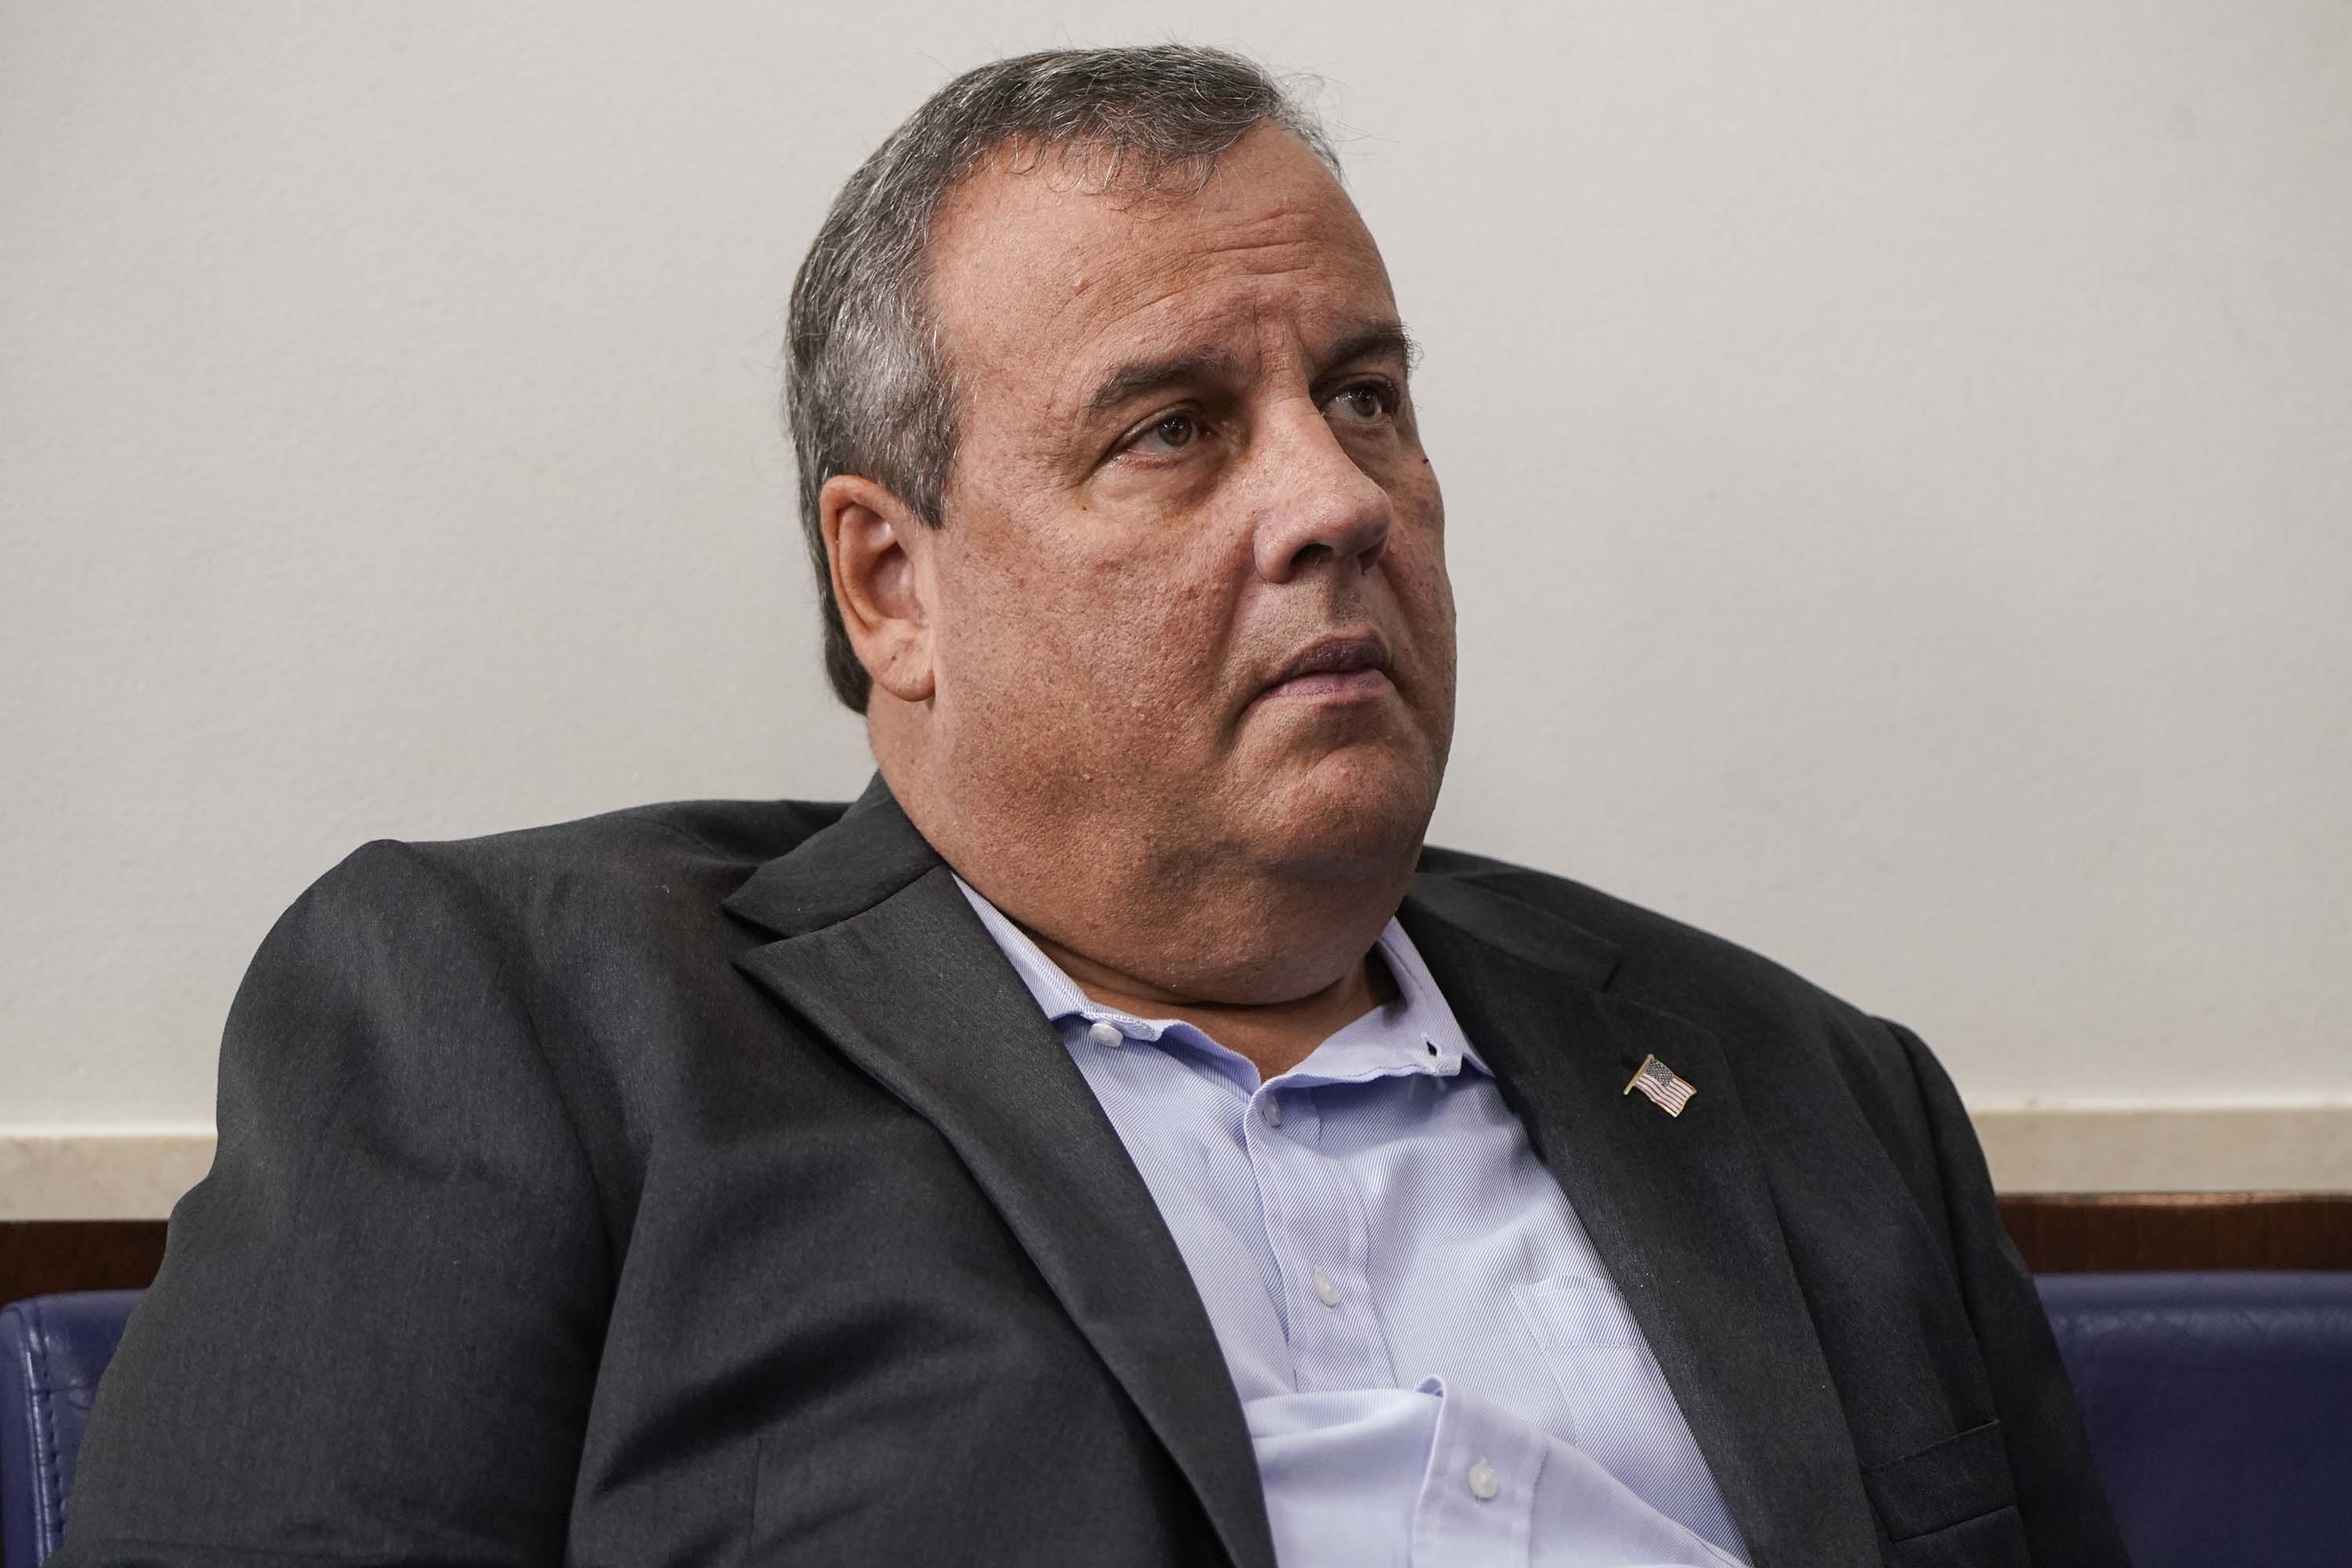 Former New Jersey governor Chris Christie listens as President Trump speaks during a news conference at the White House on September 27.